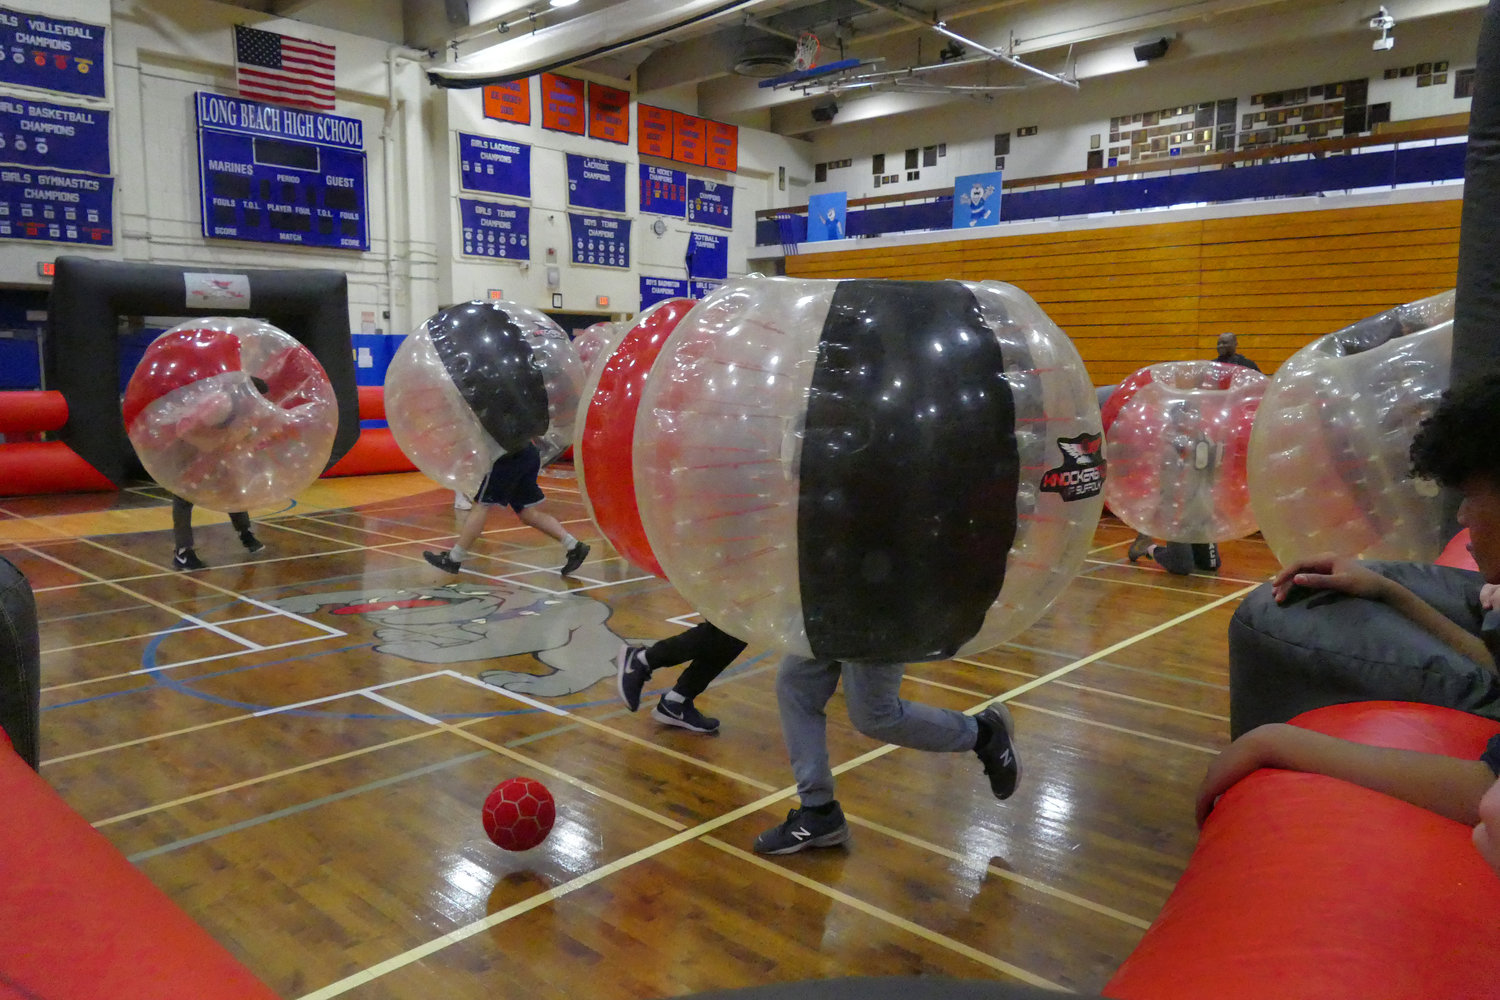 Students played bubble soccer at the High School’s teen night last Friday.